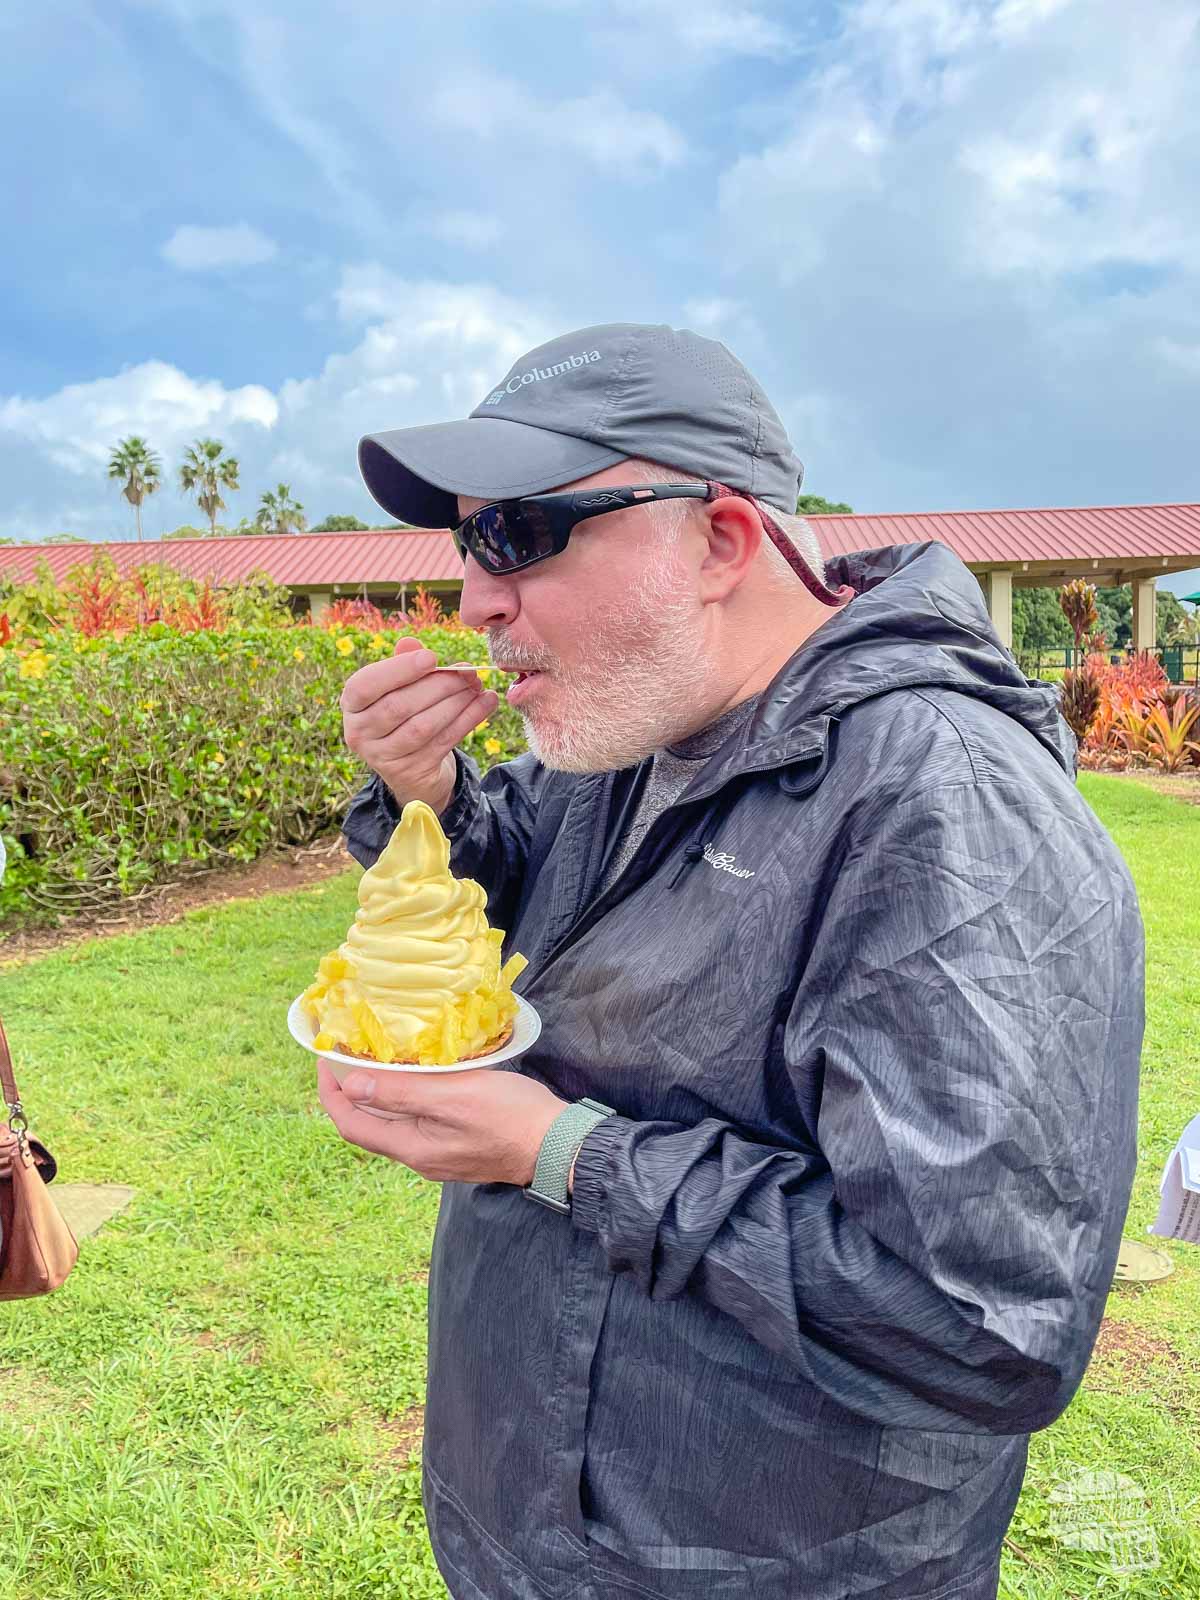 Grant eating Dole Whip